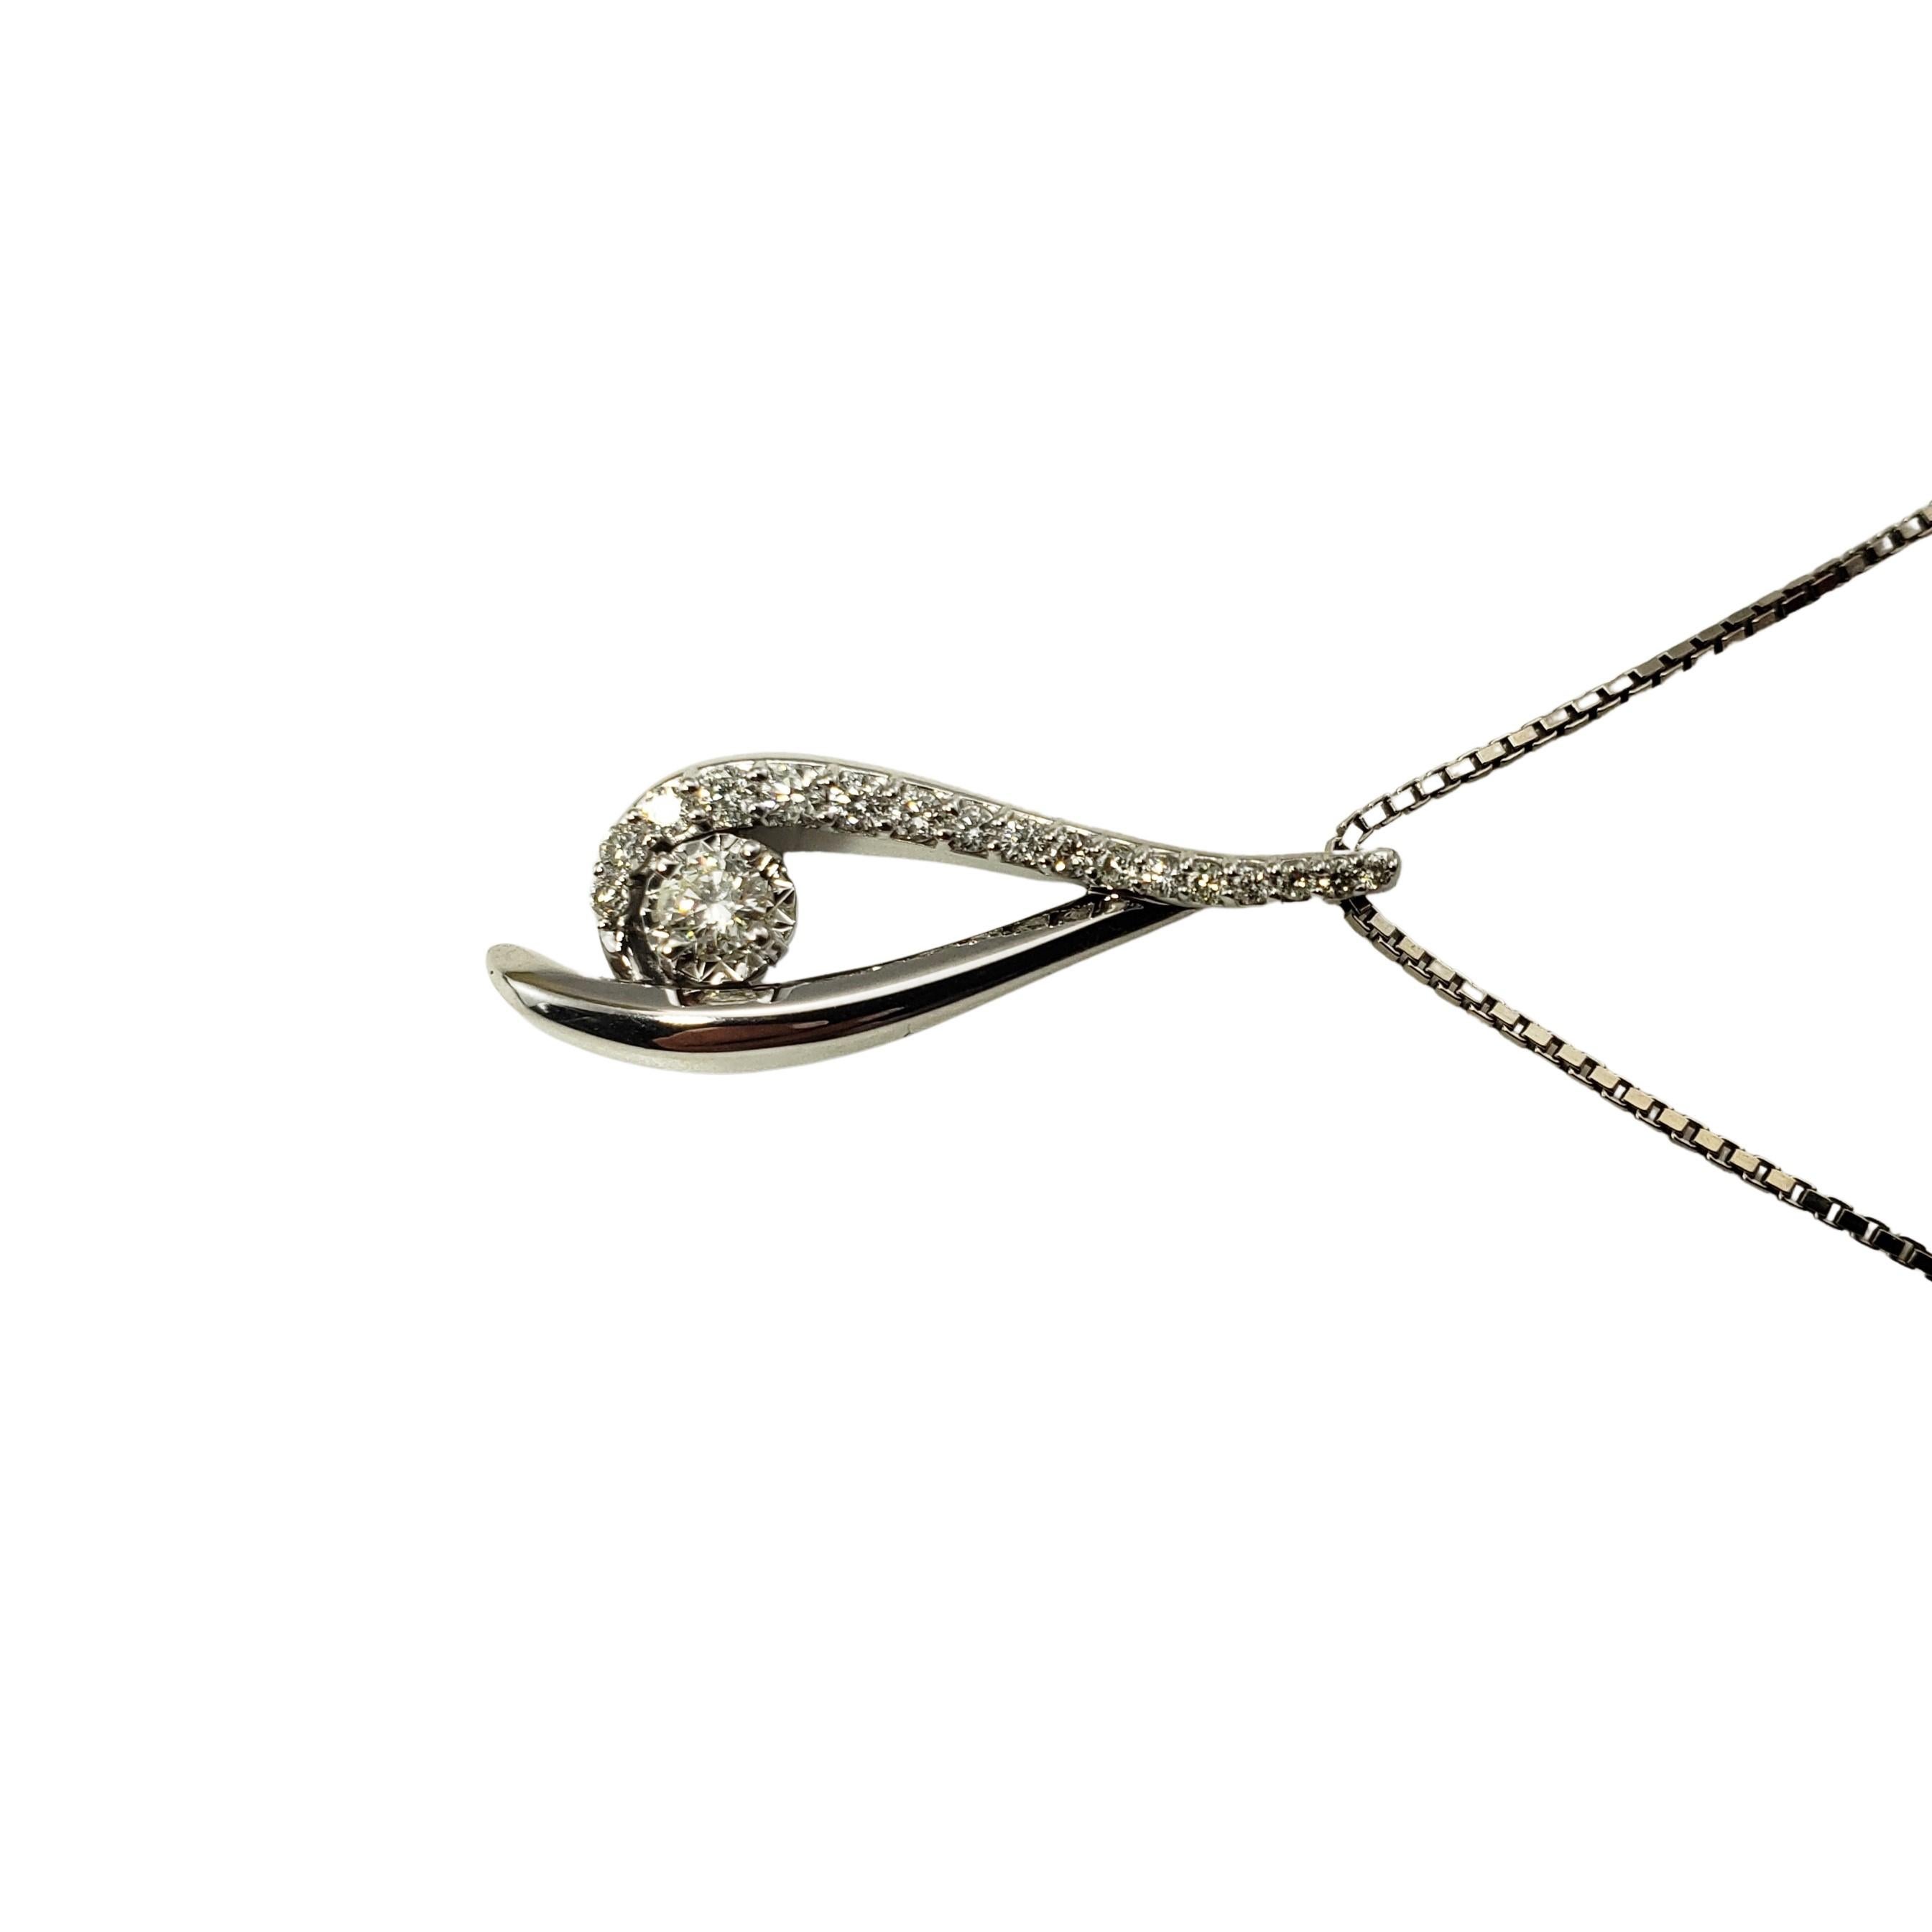 14 Karat White Gold and Diamond Pendant Necklace For Sale 2